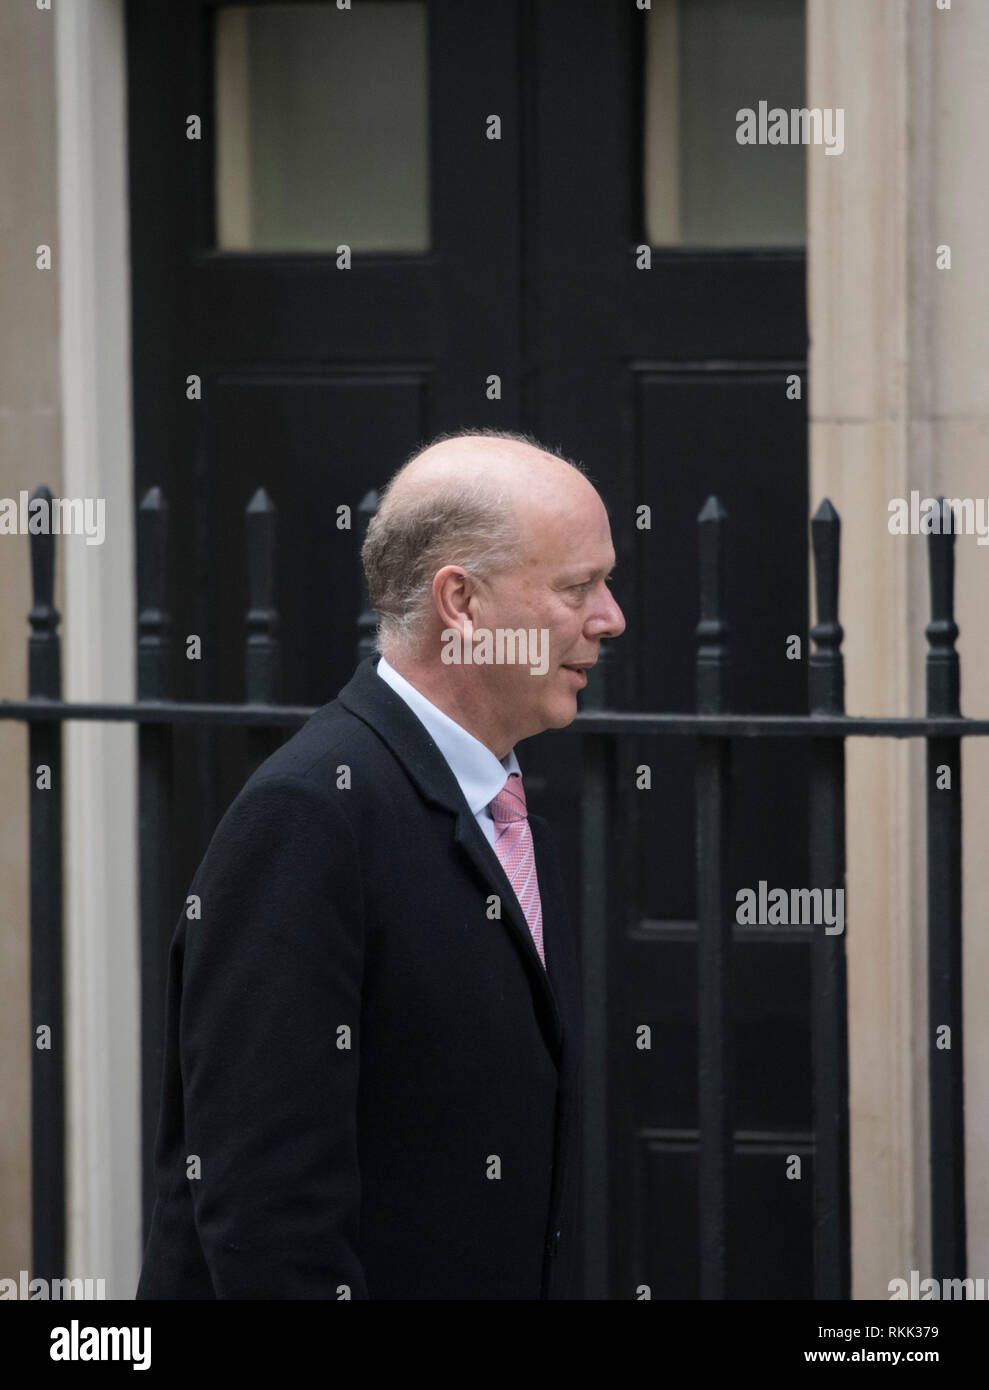 Downing Street, London, UK. 12 February 2019. Government Ministers arrive in Downing Street for weekly cabinet meeting. Chris Grayling, Secretary of State for Transport. Credit: Malcolm Park/Alamy Live News. Stock Photo